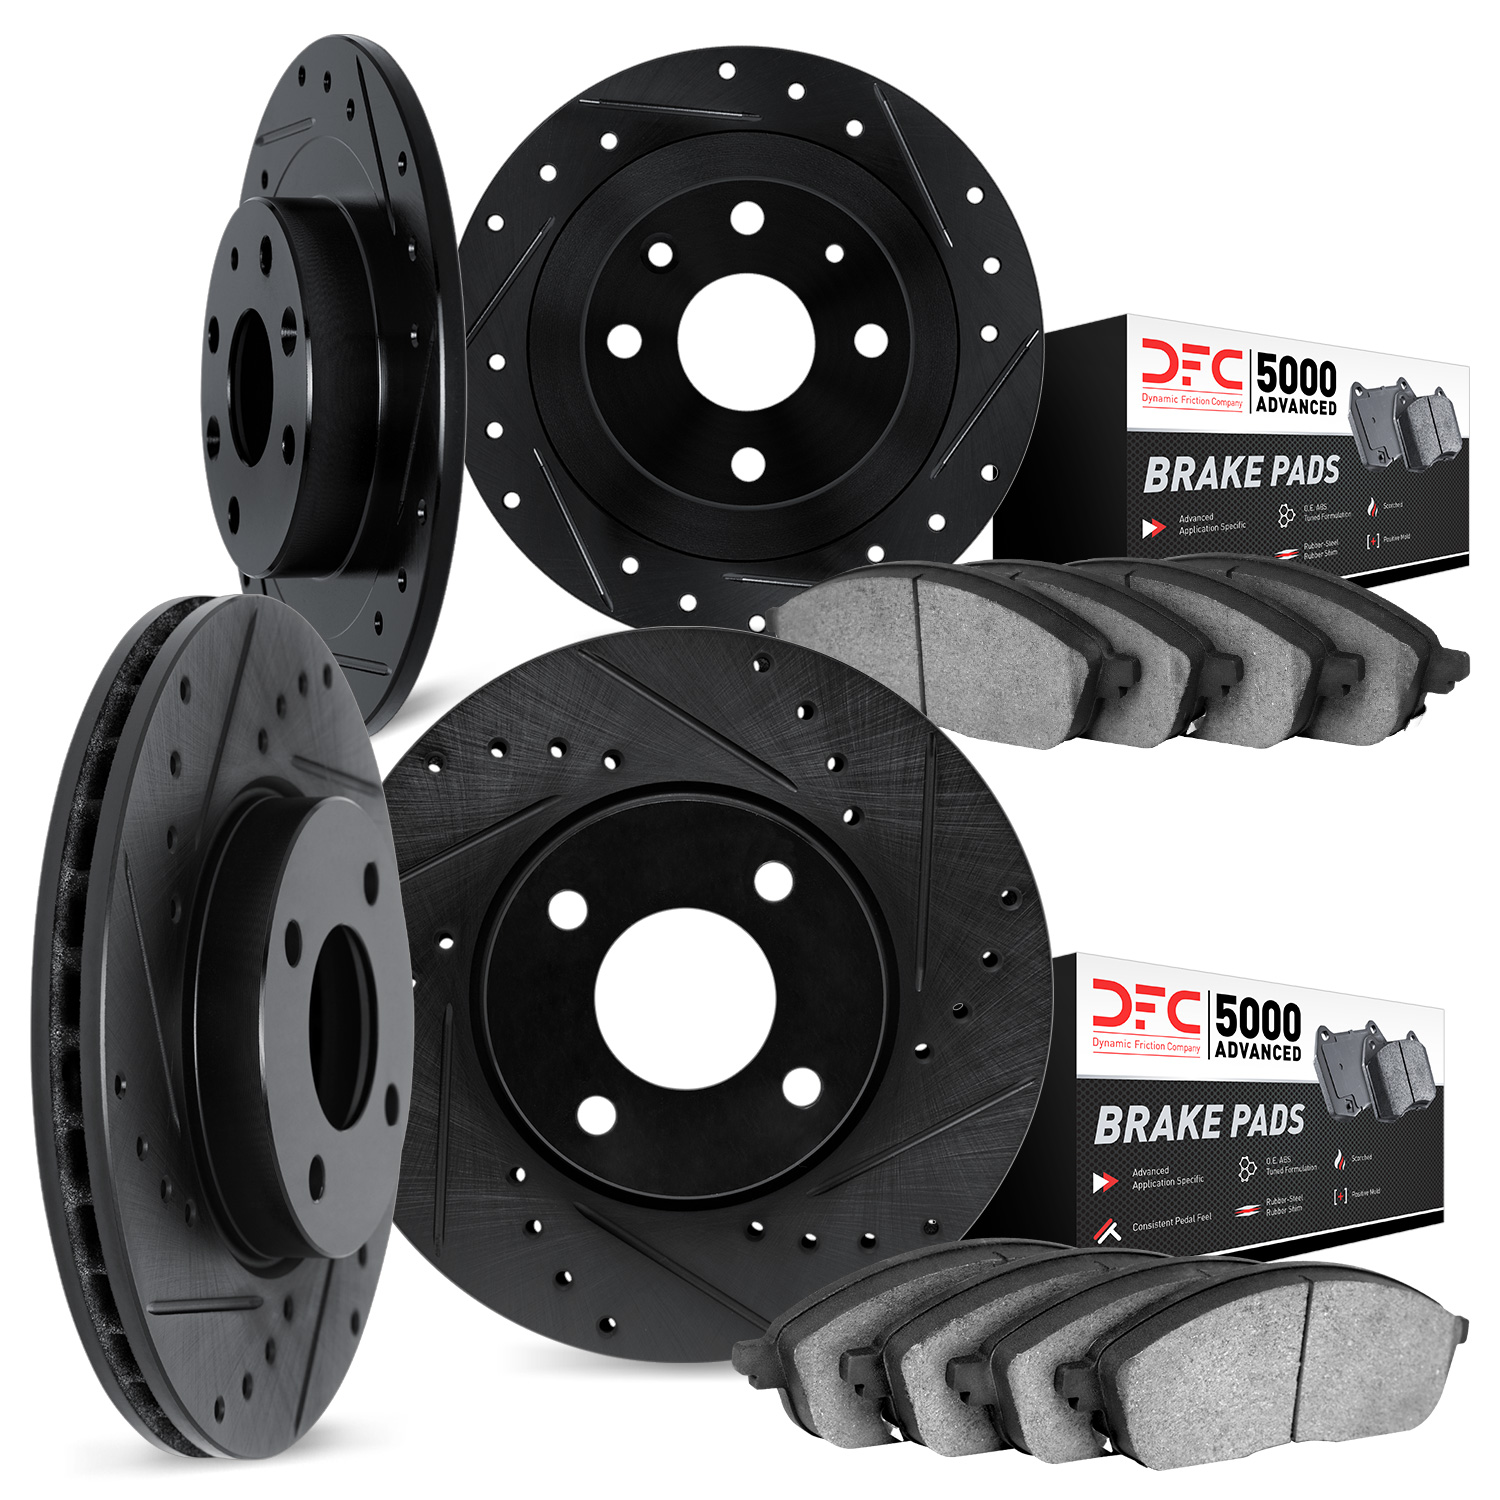 8504-72036 Drilled/Slotted Brake Rotors w/5000 Advanced Brake Pads Kit [Black], 1991-1991 Mitsubishi, Position: Front and Rear